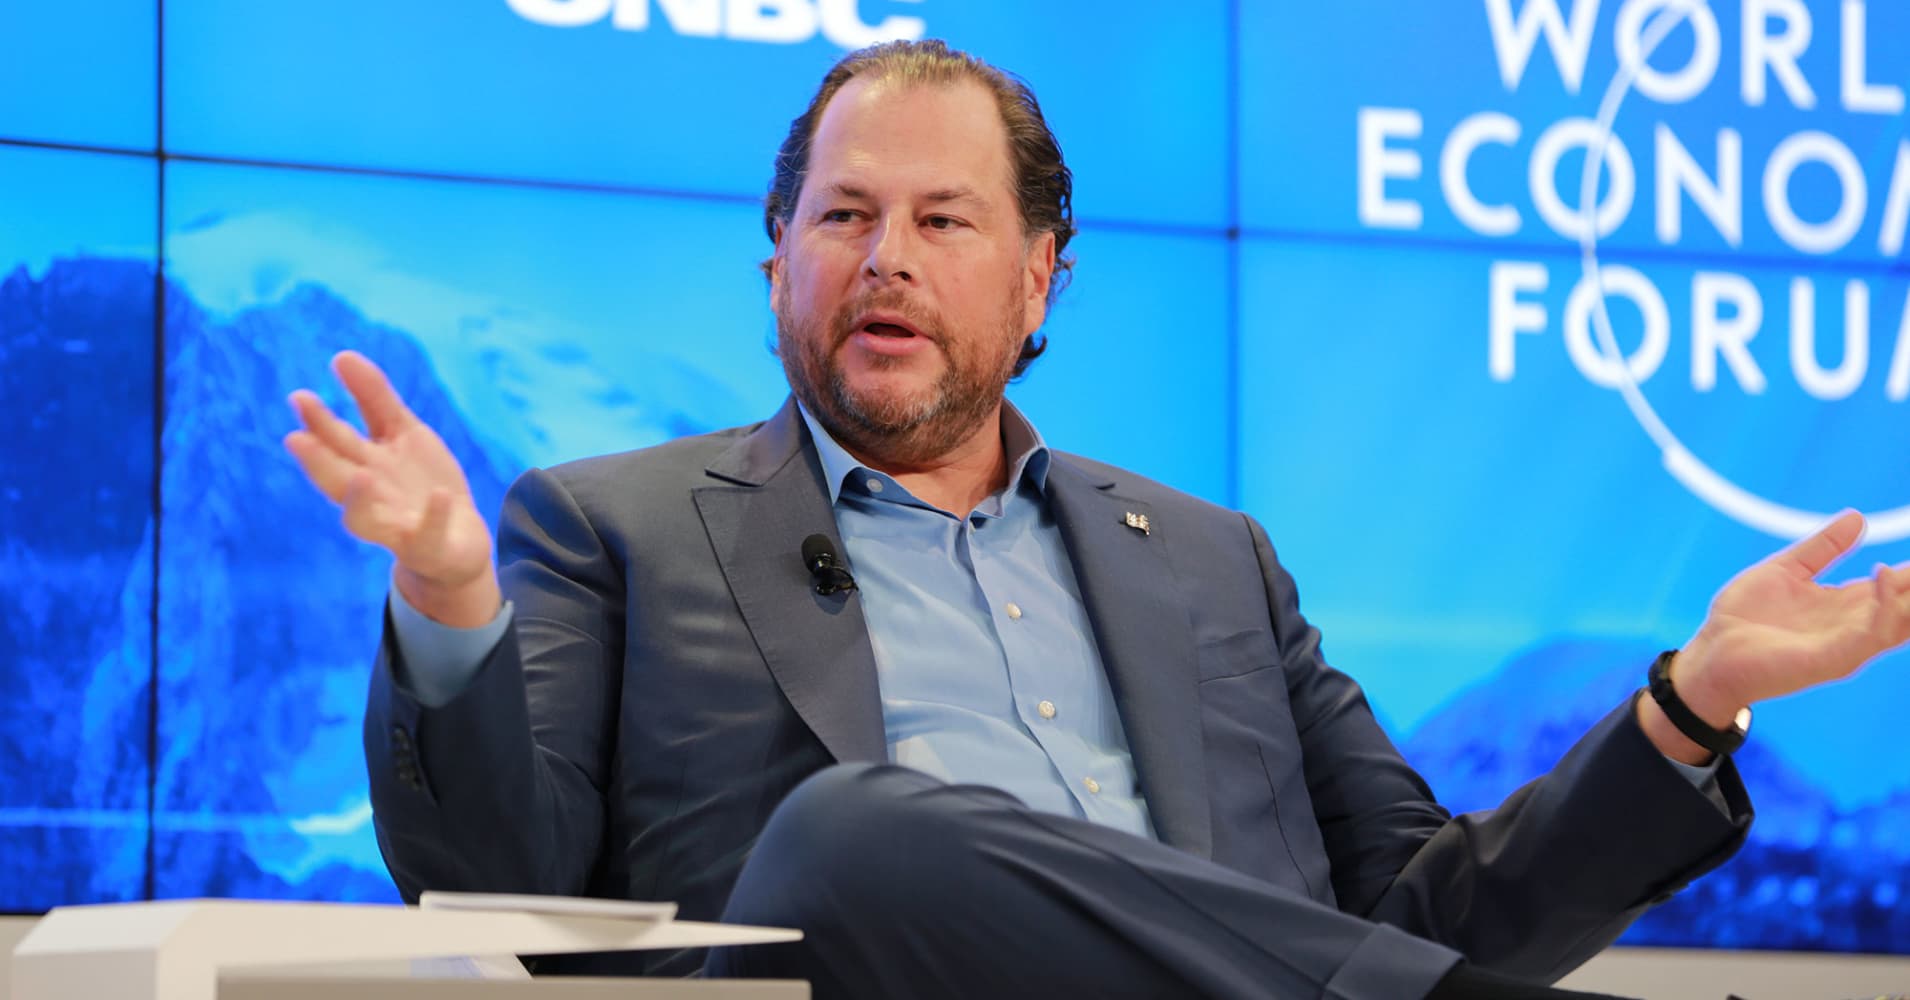 Cloud stocks get hammered, with Salesforce suffering worst day since early 2016